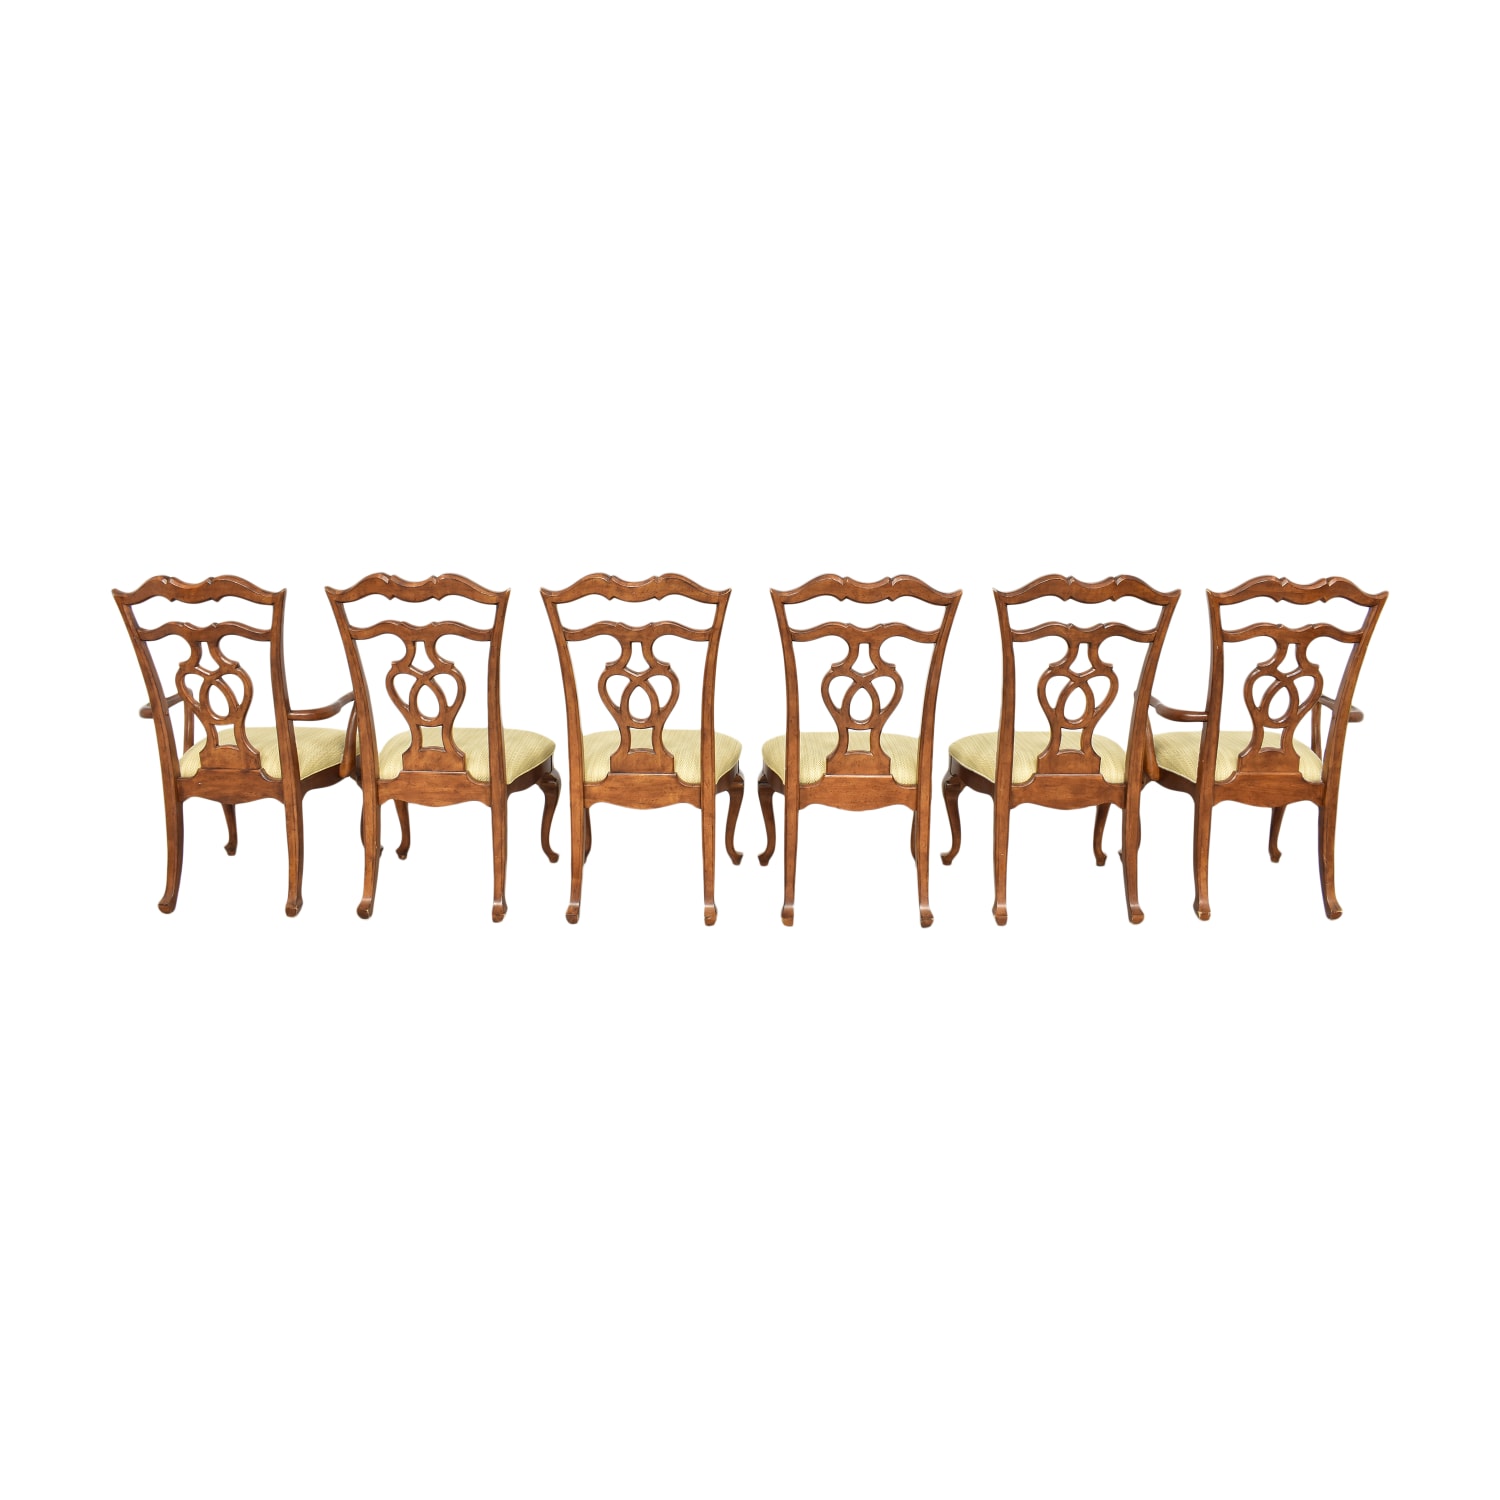 Thomasville Thomasville Upholstered Dining Chairs dimensions